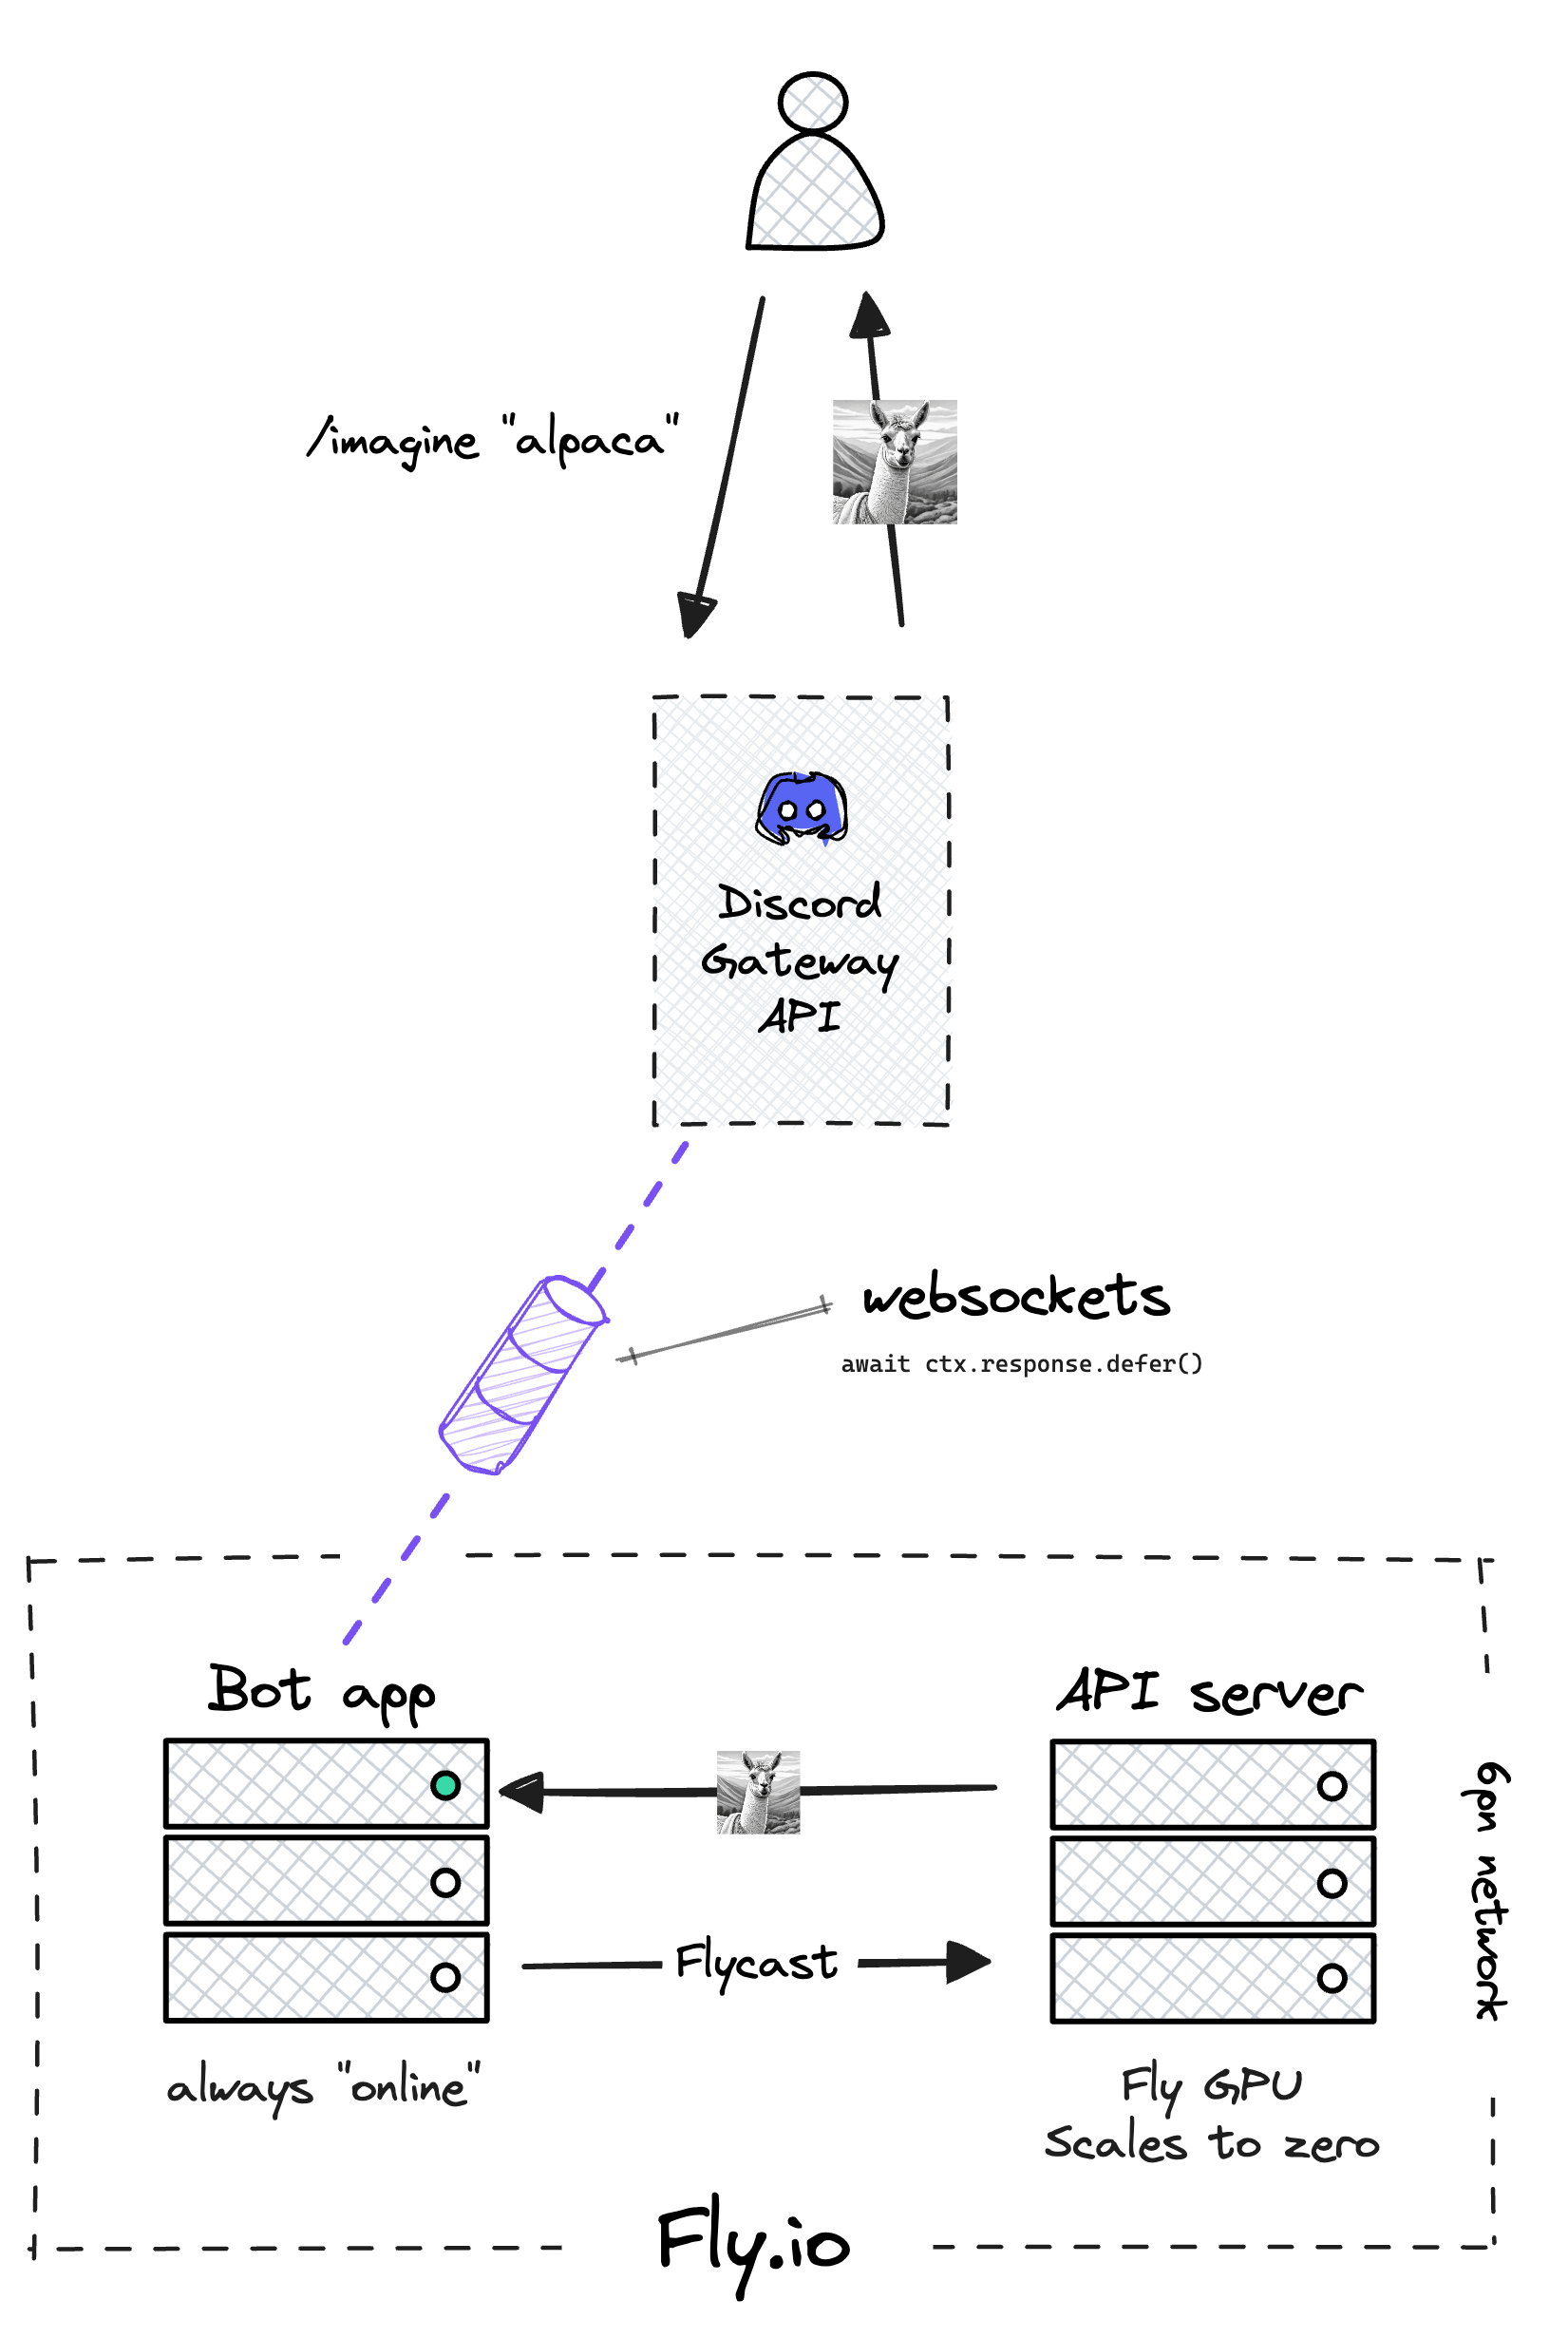 An architecture diagram explaining how the two apps will communicate and return the requested image to an end user.